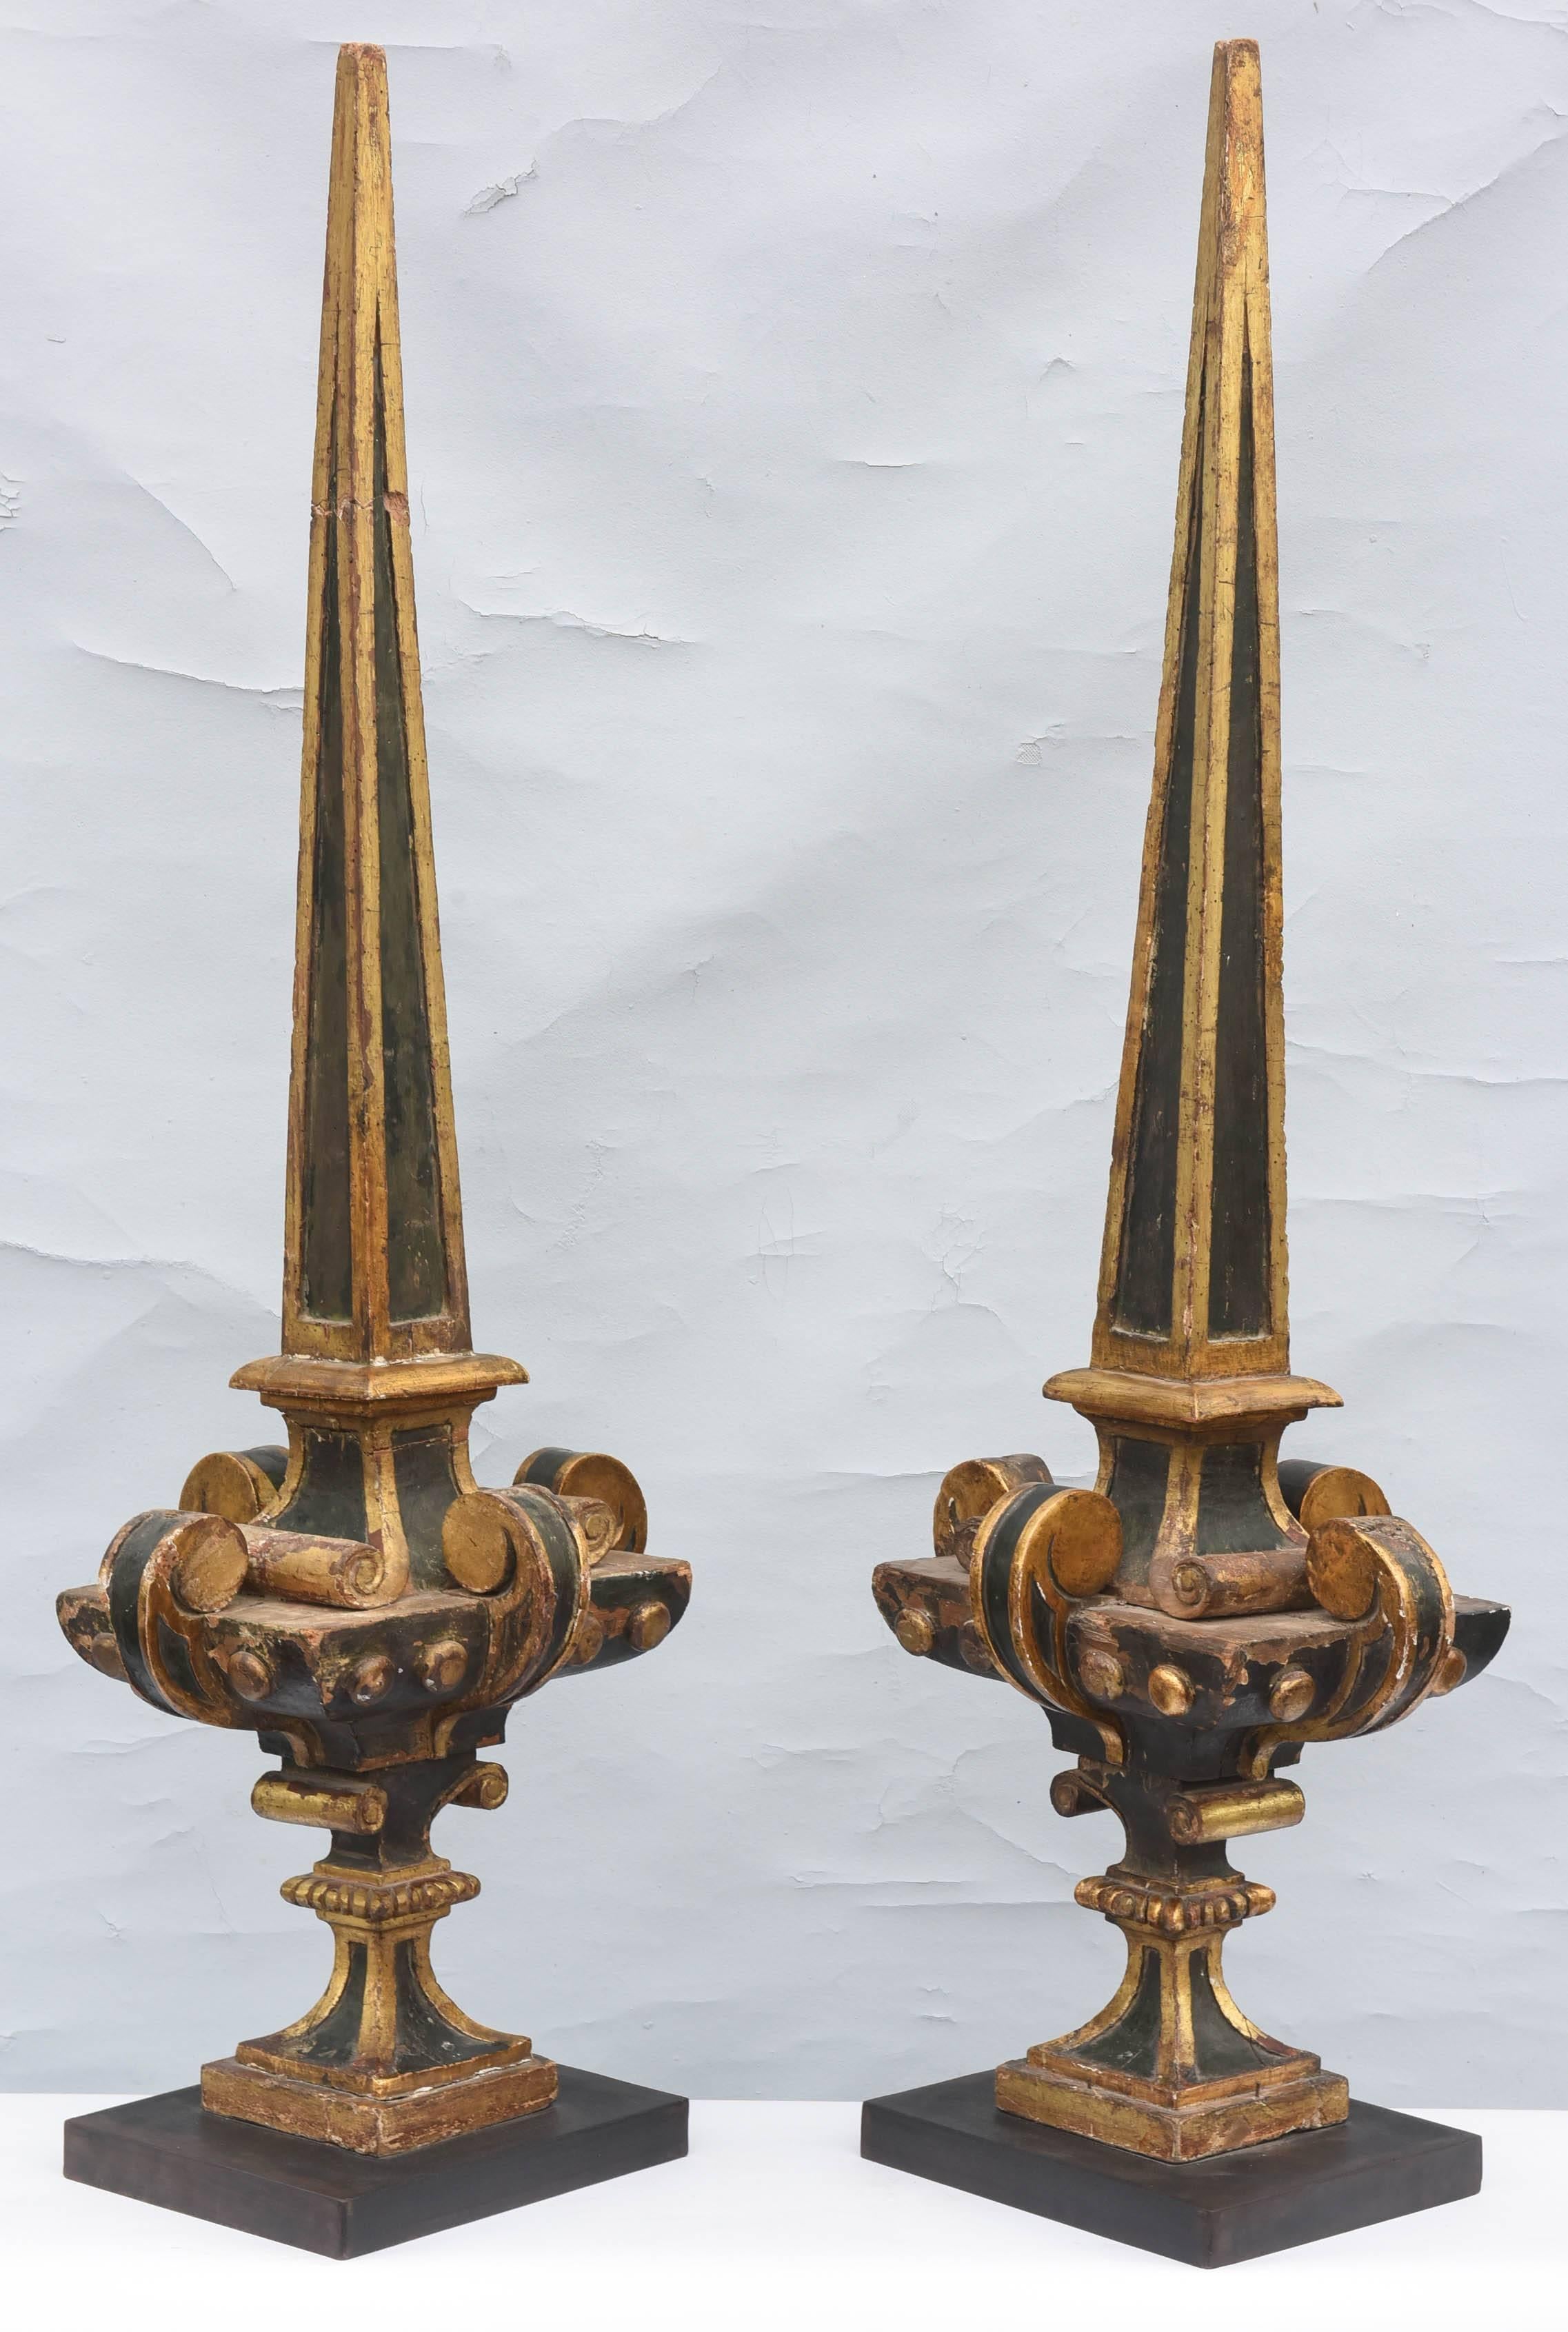 Monumental pair of finials, black-painted and parcel-gilt, of carved wood, each fielded obelisk spire, on urn-form base with scrolling handles, on beaded socle, surmounted by ionic capital, on square foot, mounted on black iron plinth.

Iron base